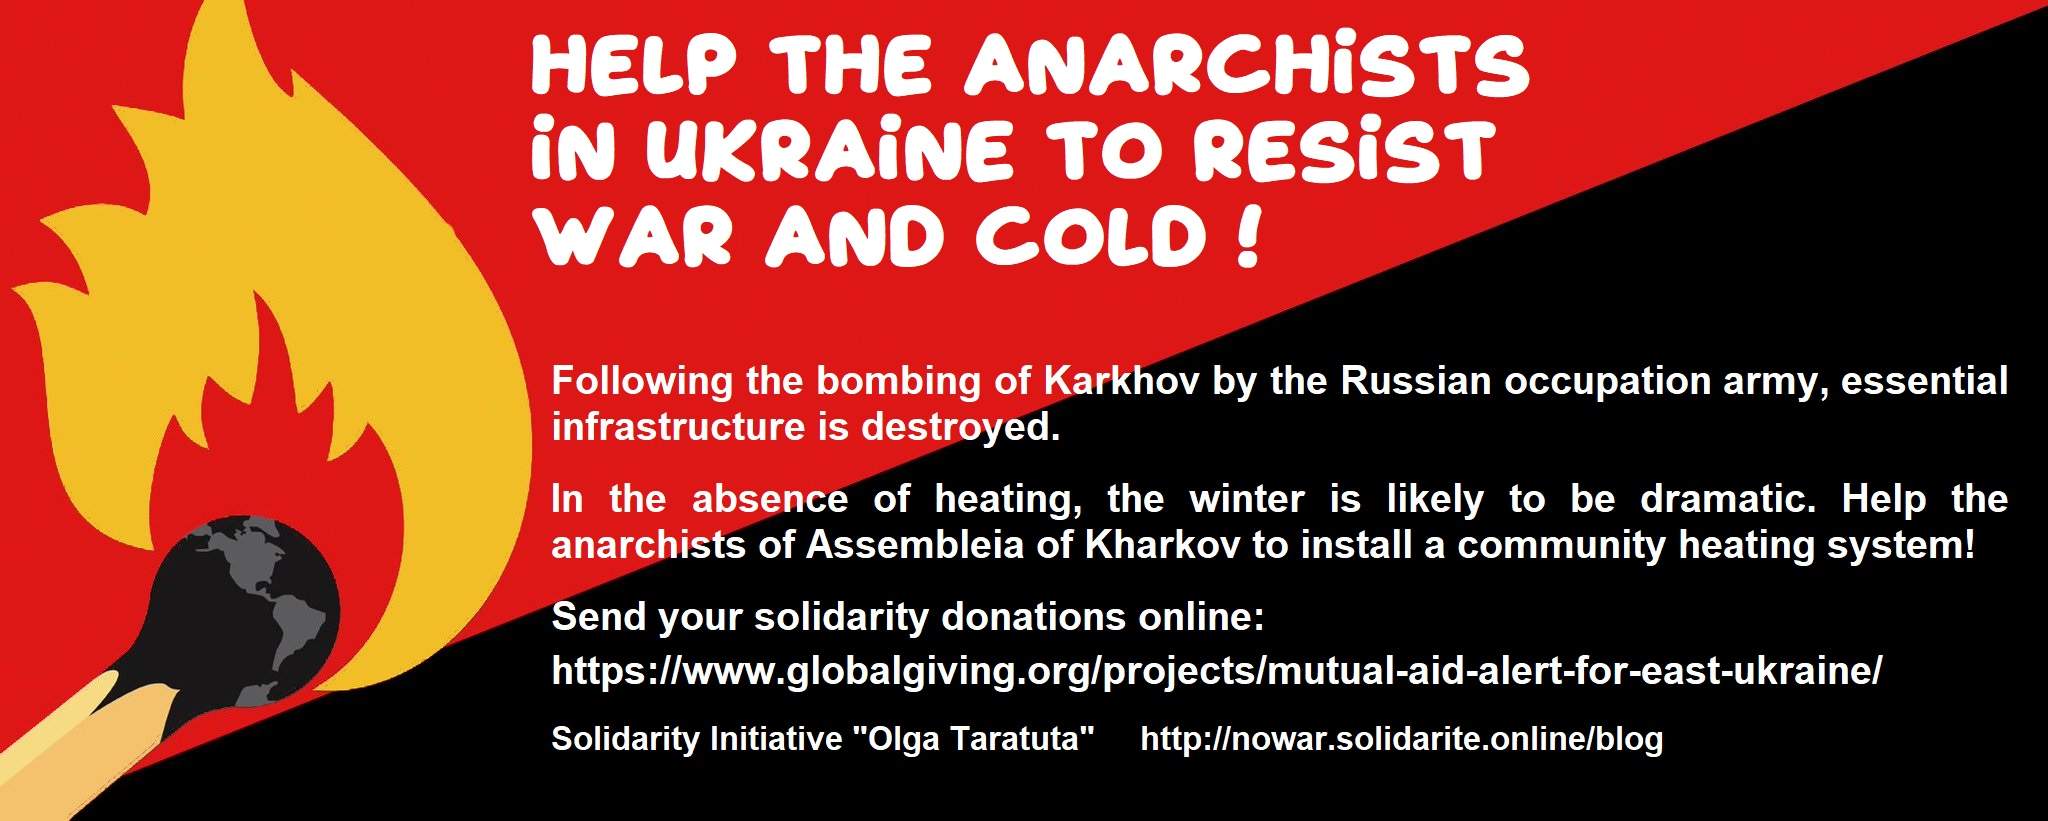 WINTER IS COMING, HELP THE ANARCHISTS IN UKRAINE TO RESIST WAR AND COLD !